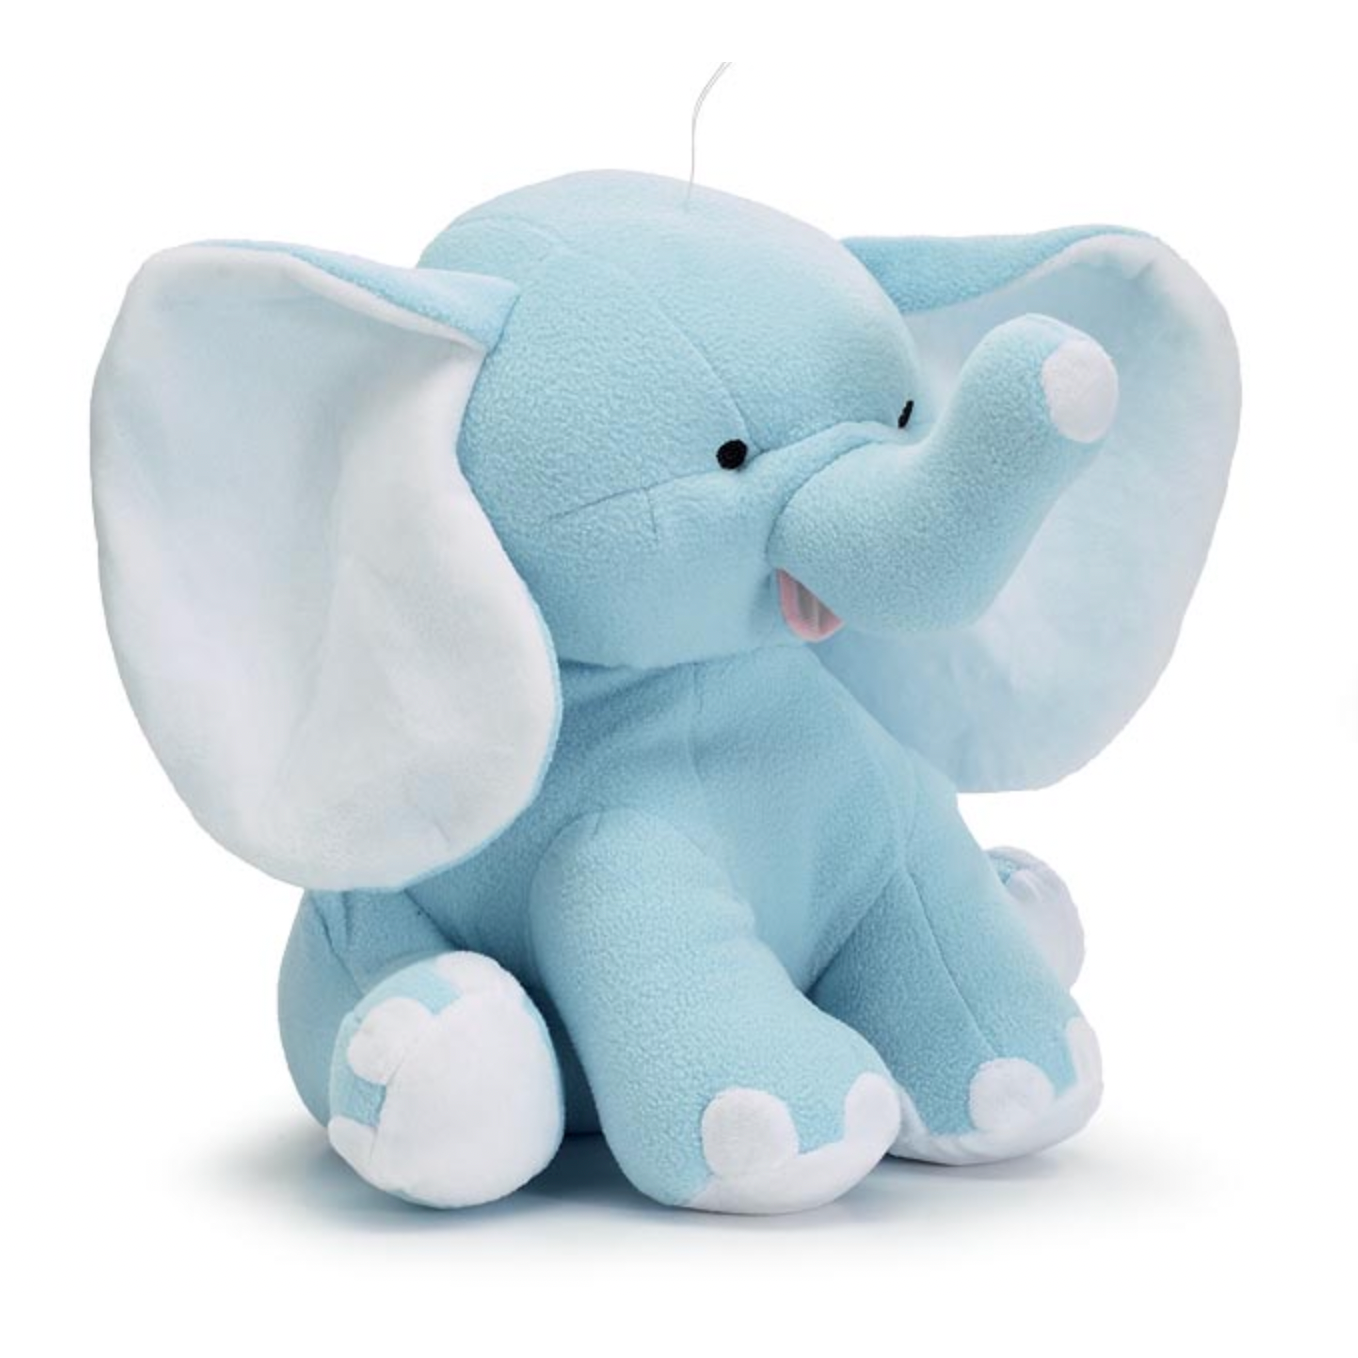 13" Elephant with Ear Personalization